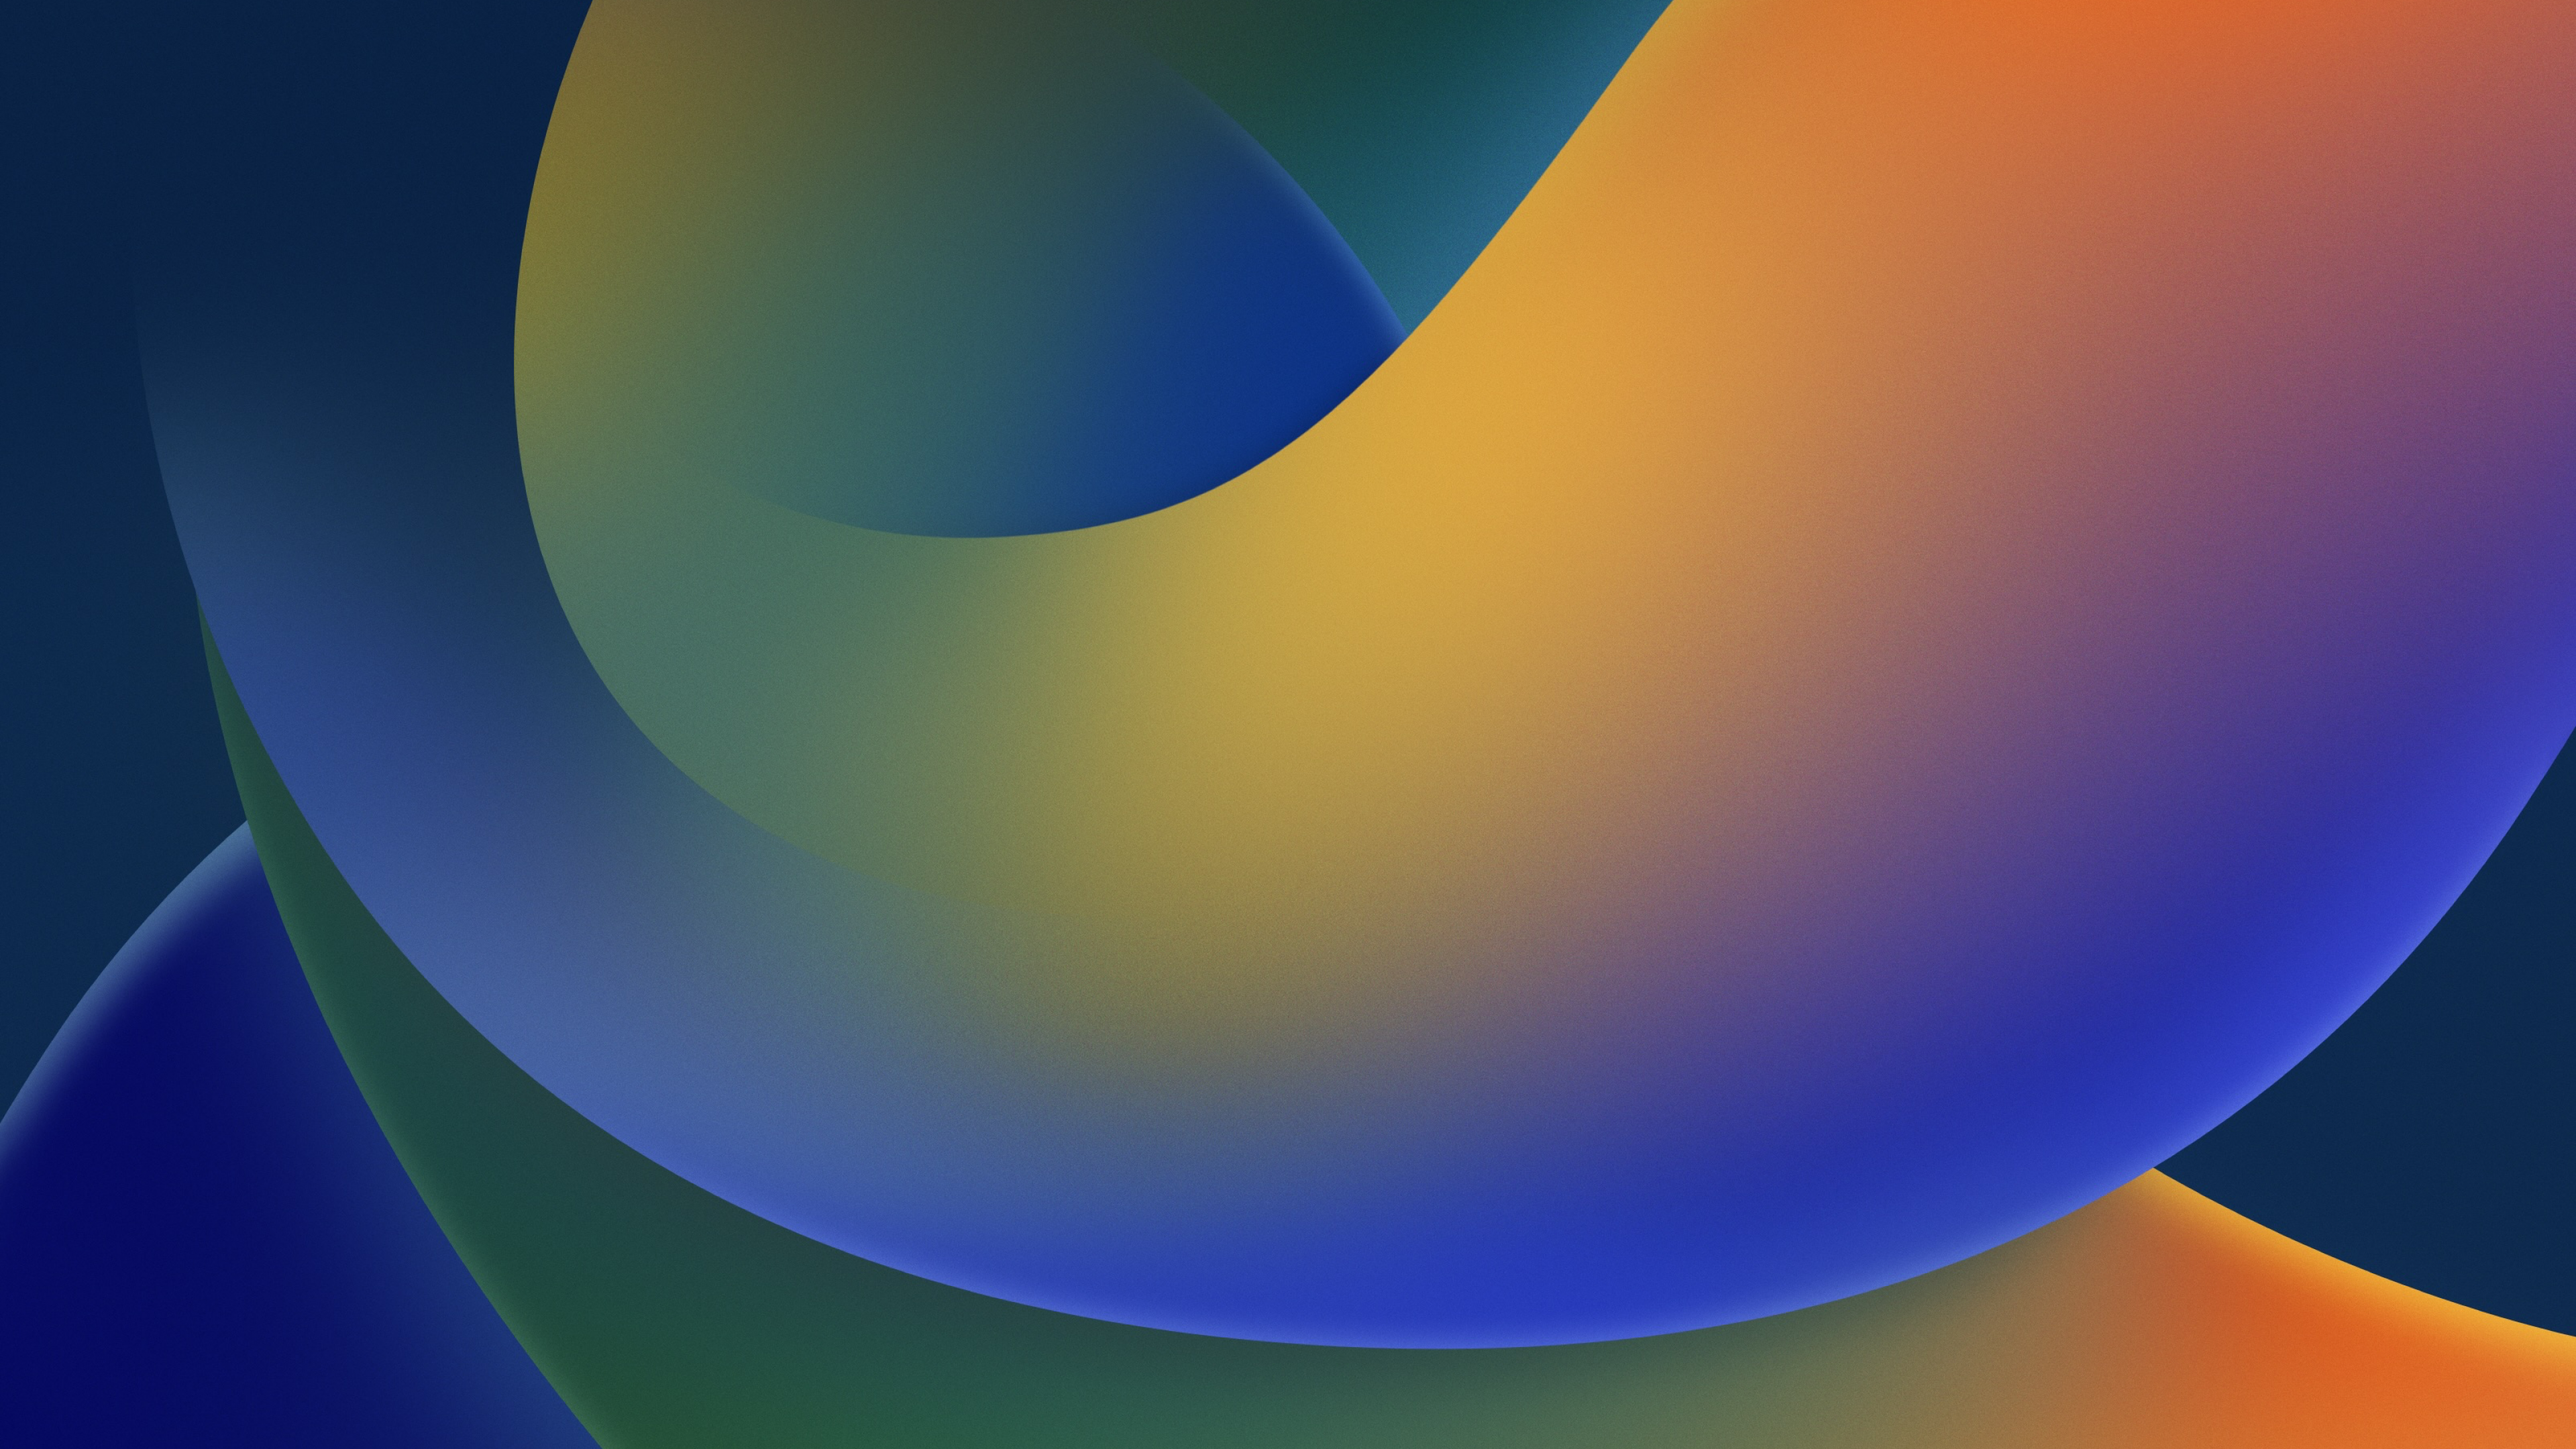 Wallpaper ID: 43831 / iOS 13, iPadOS, abstract, Apple September 2019 Event,  4K free download